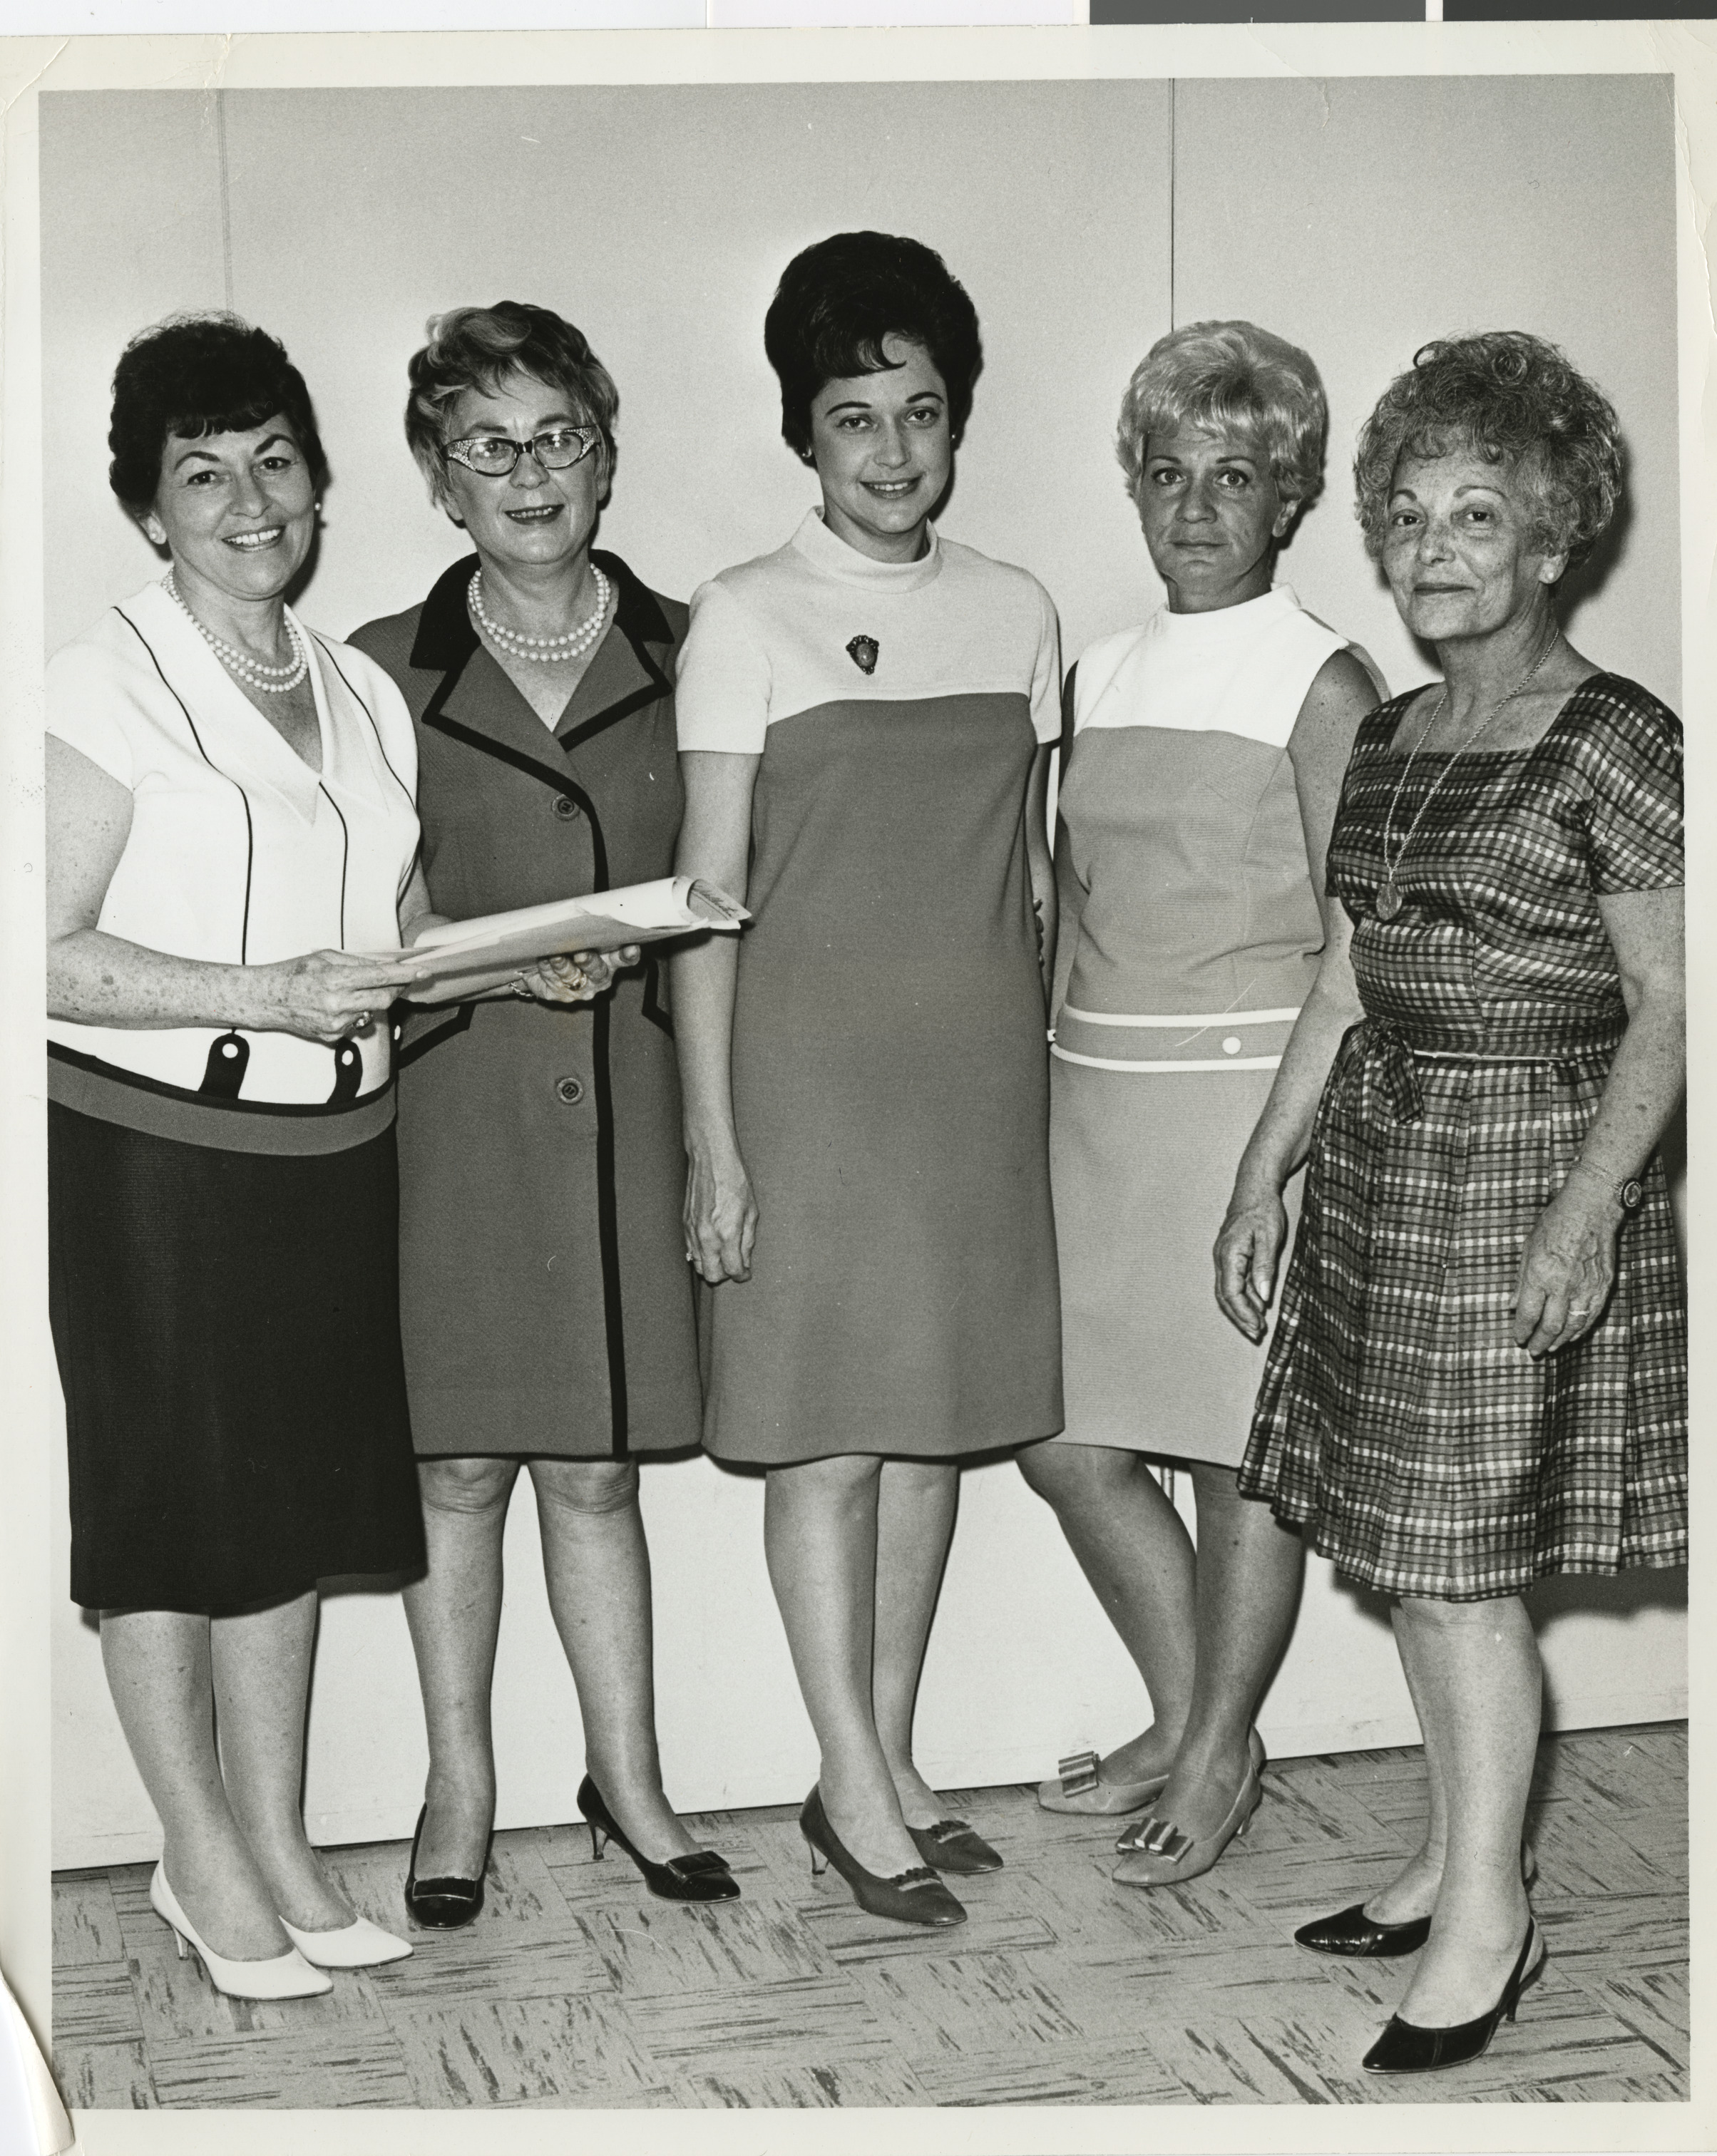 Photograph of a group of women, 1960s